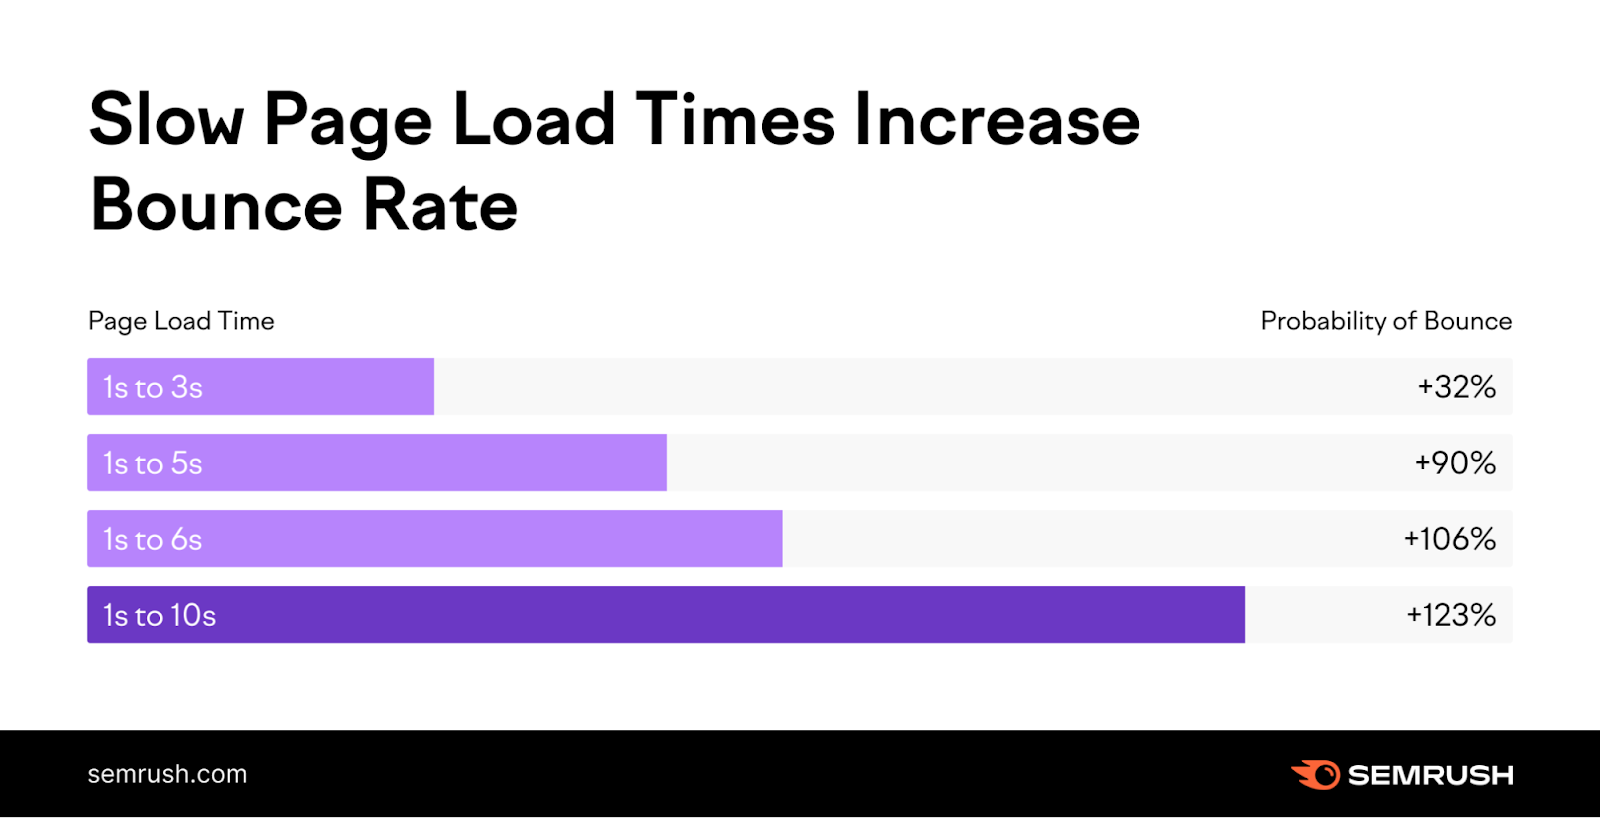 Slow page load times increase bounce rate